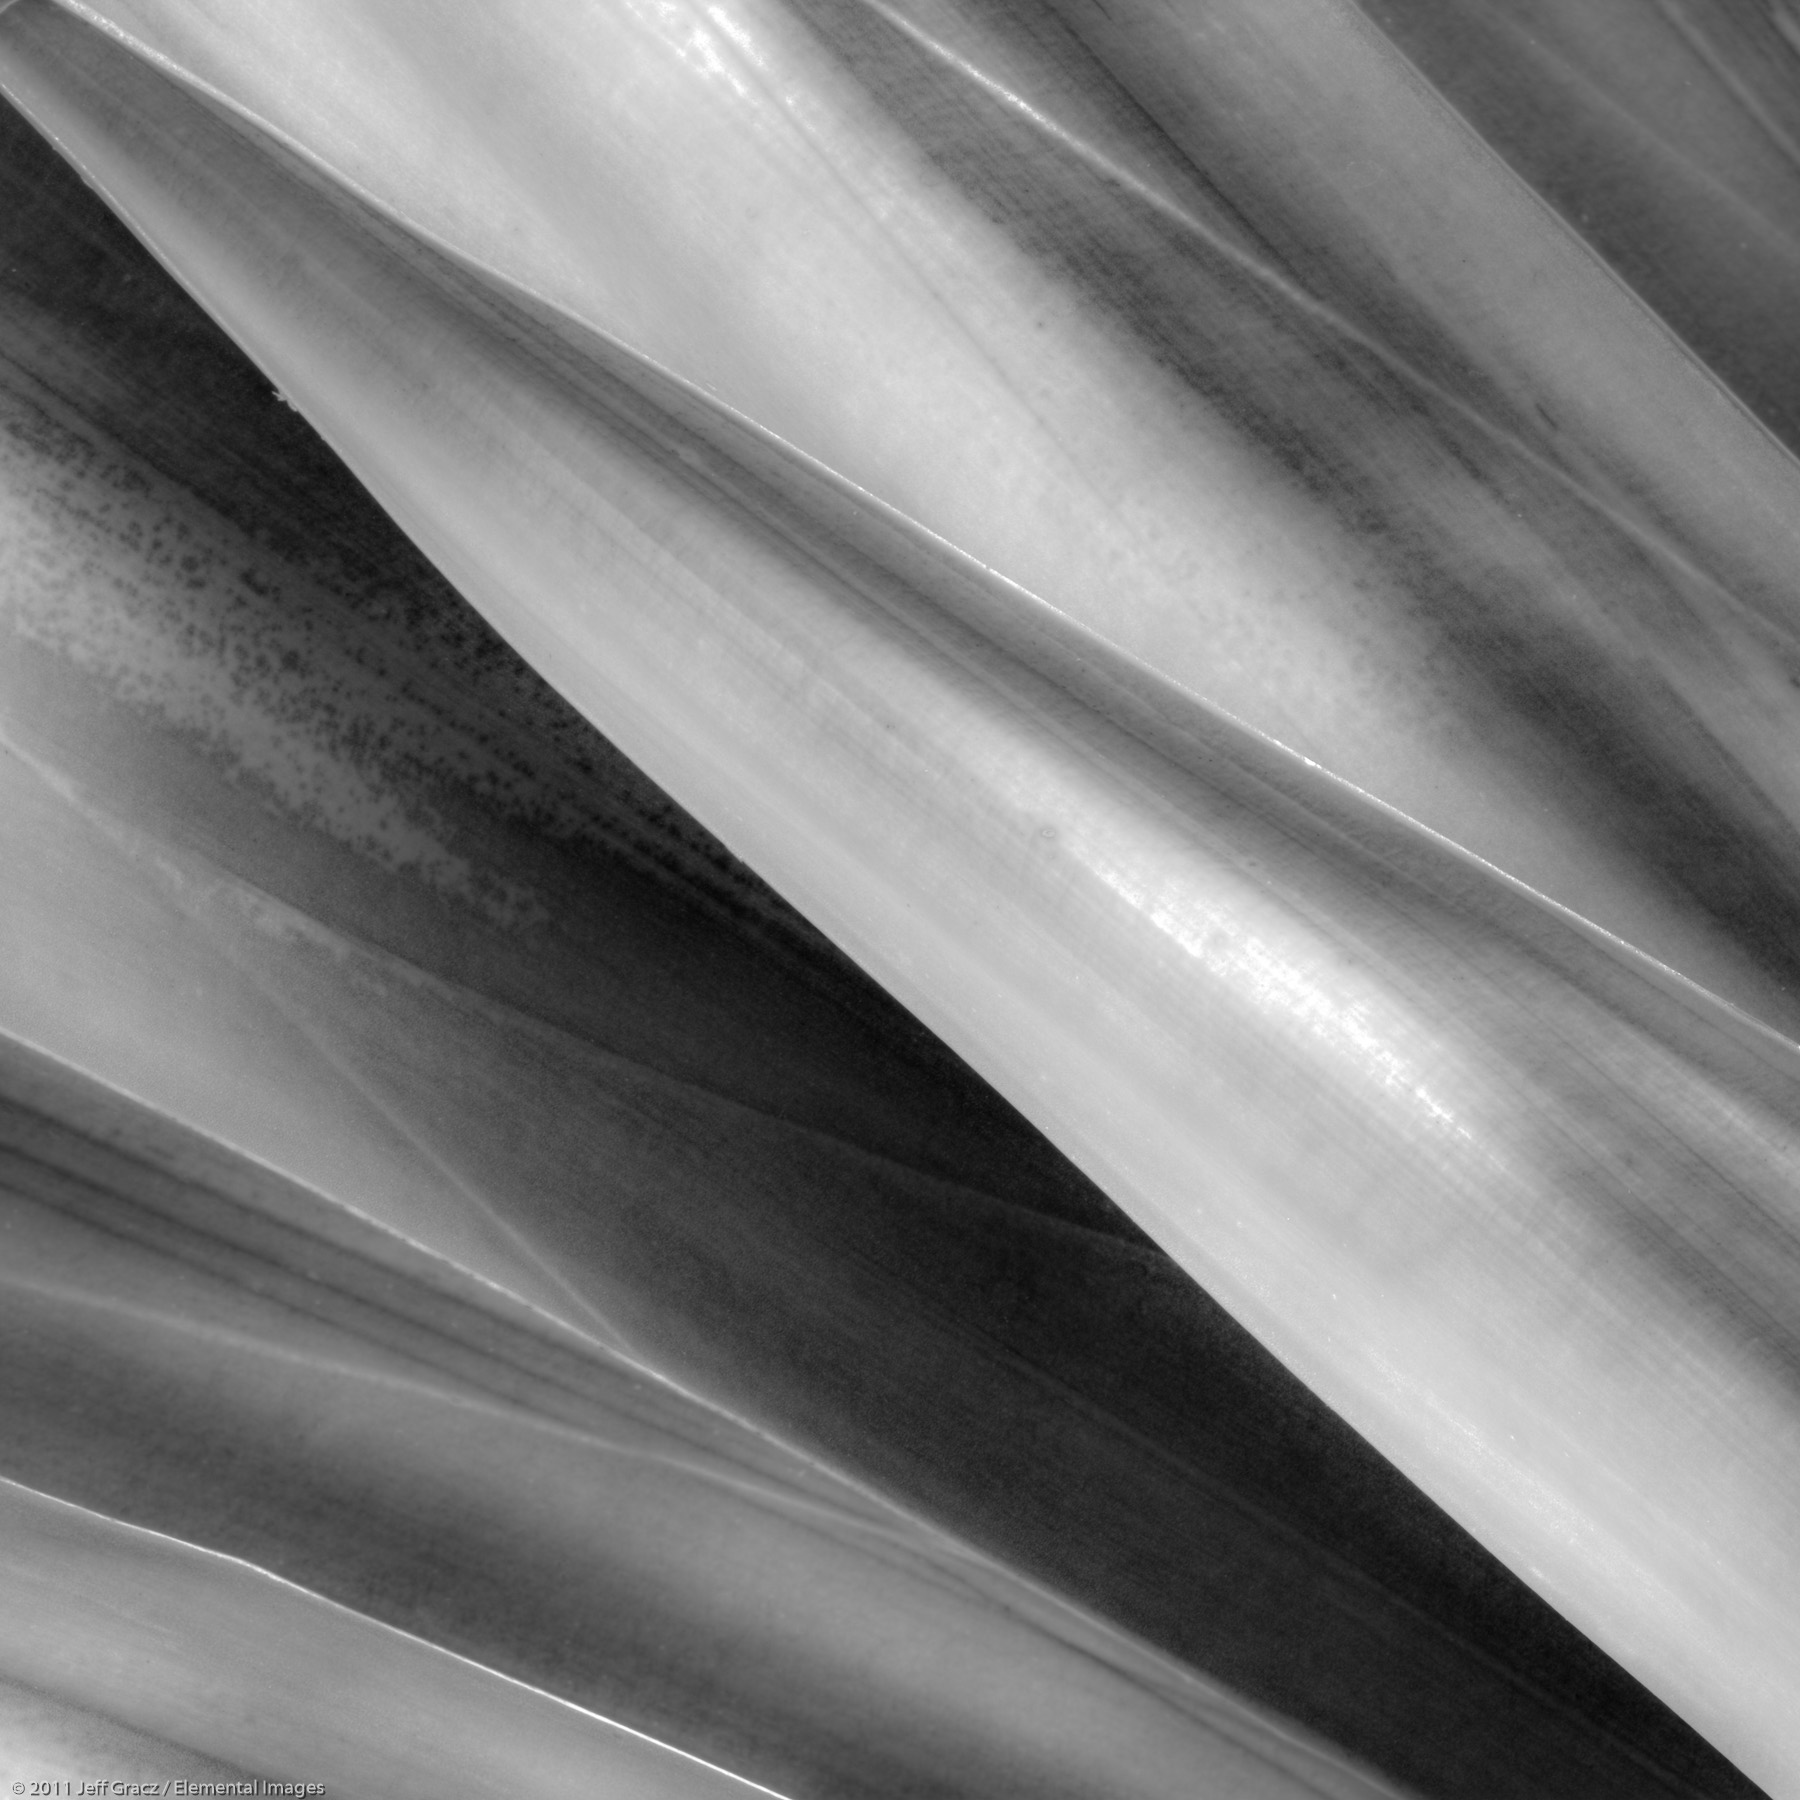 Agaves I | Encinitas | CA | USA - © © 2011 Jeff Gracz / Elemental Images - All Rights Reserved Worldwide